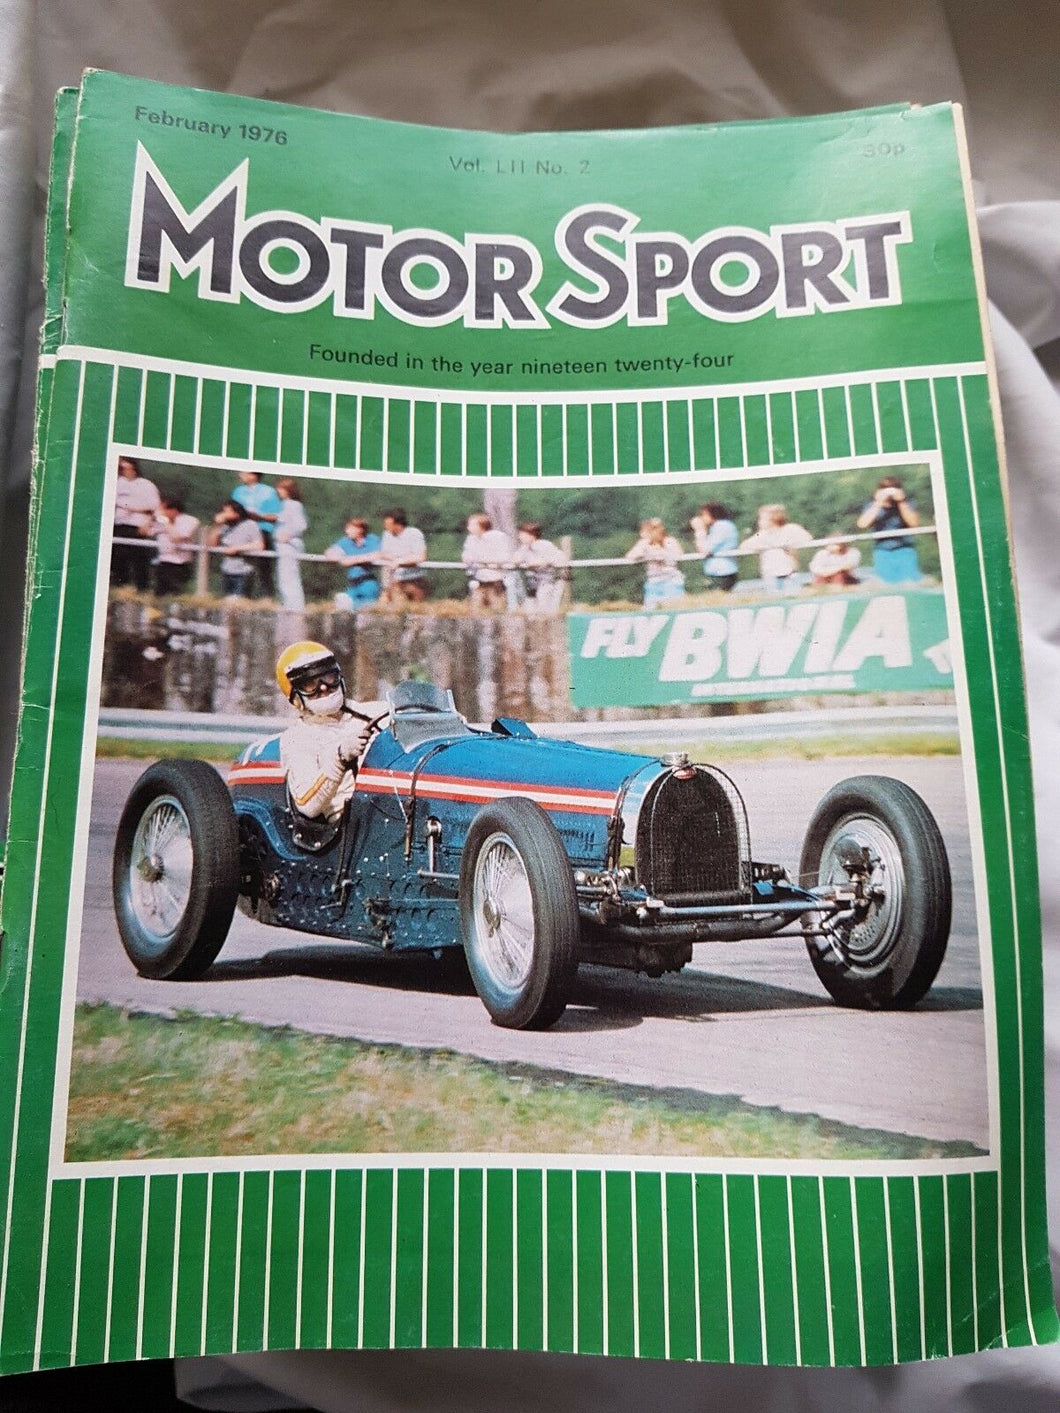 Motorsport February 1976 please see second image for contents